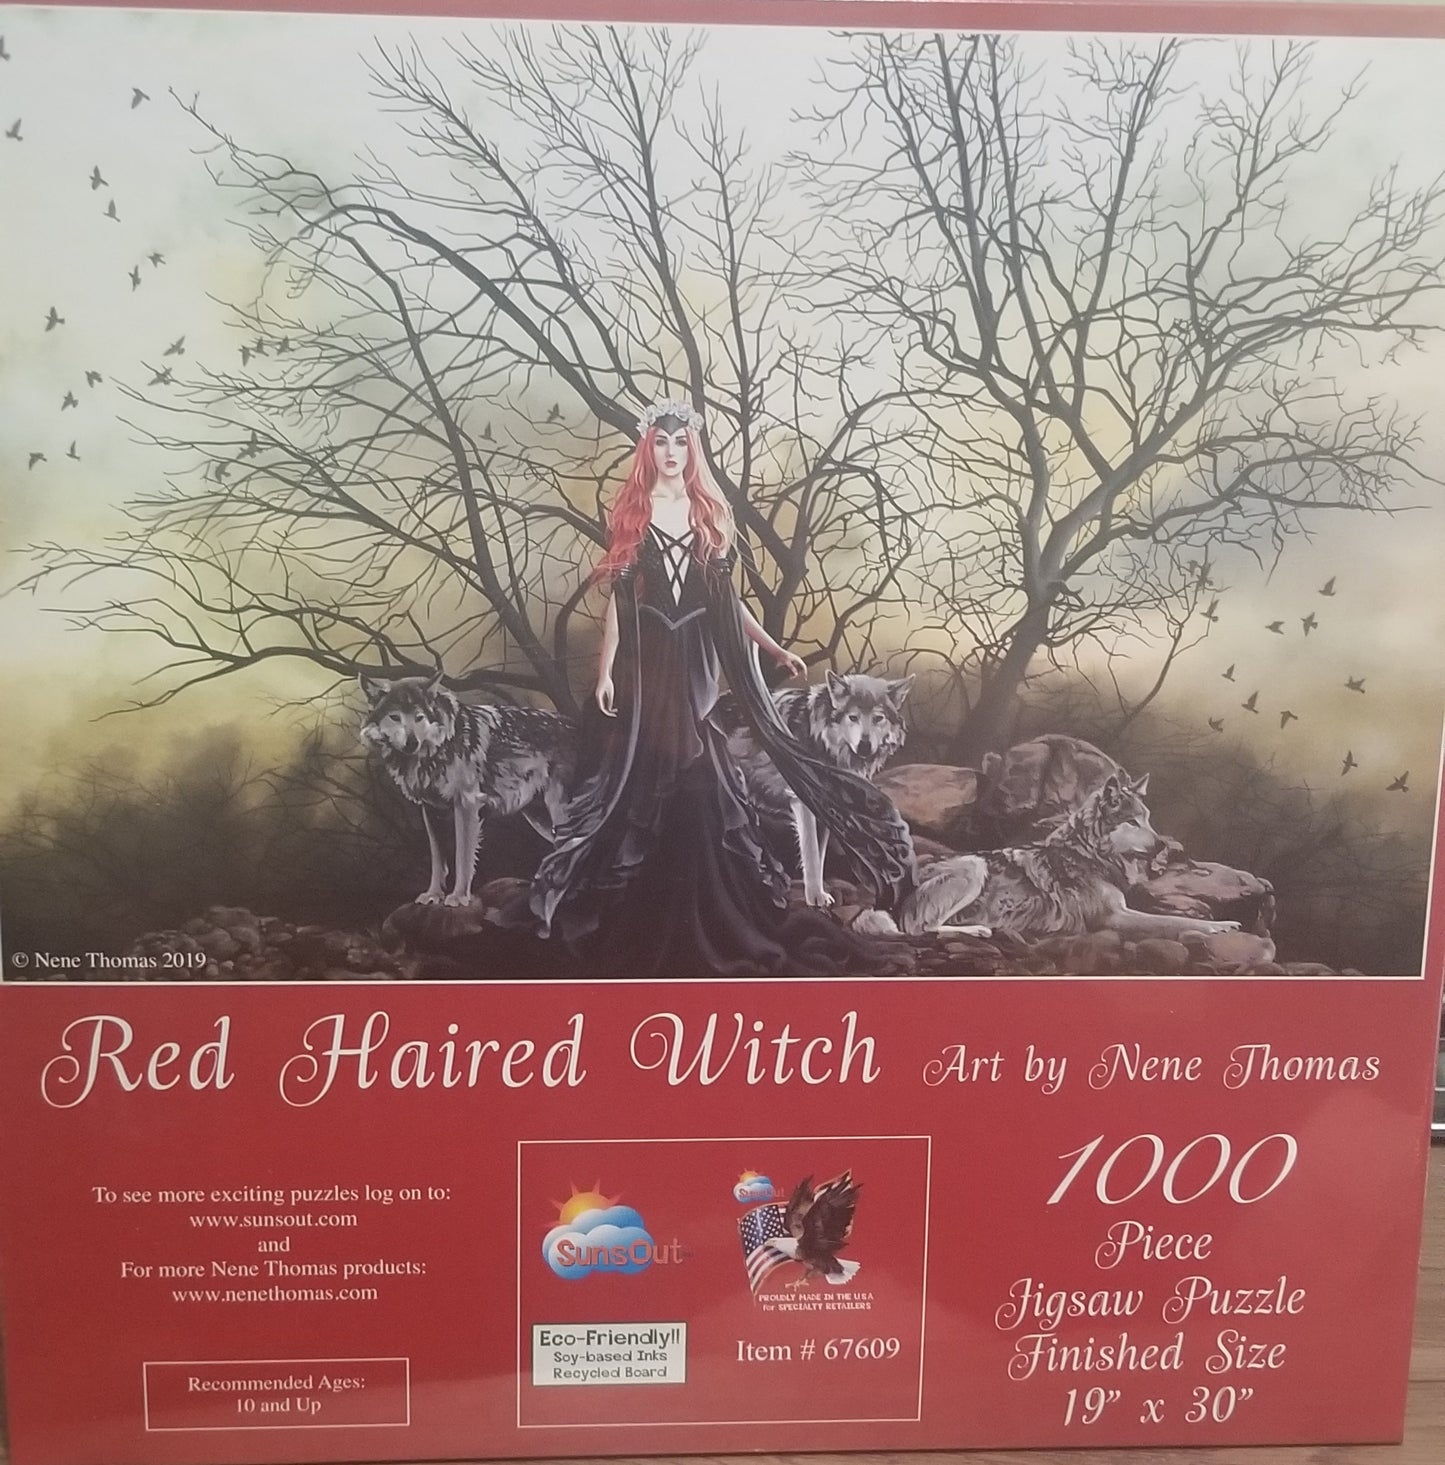 Red Haired Witch by Nene Thomas, 1000 Piece Puzzle